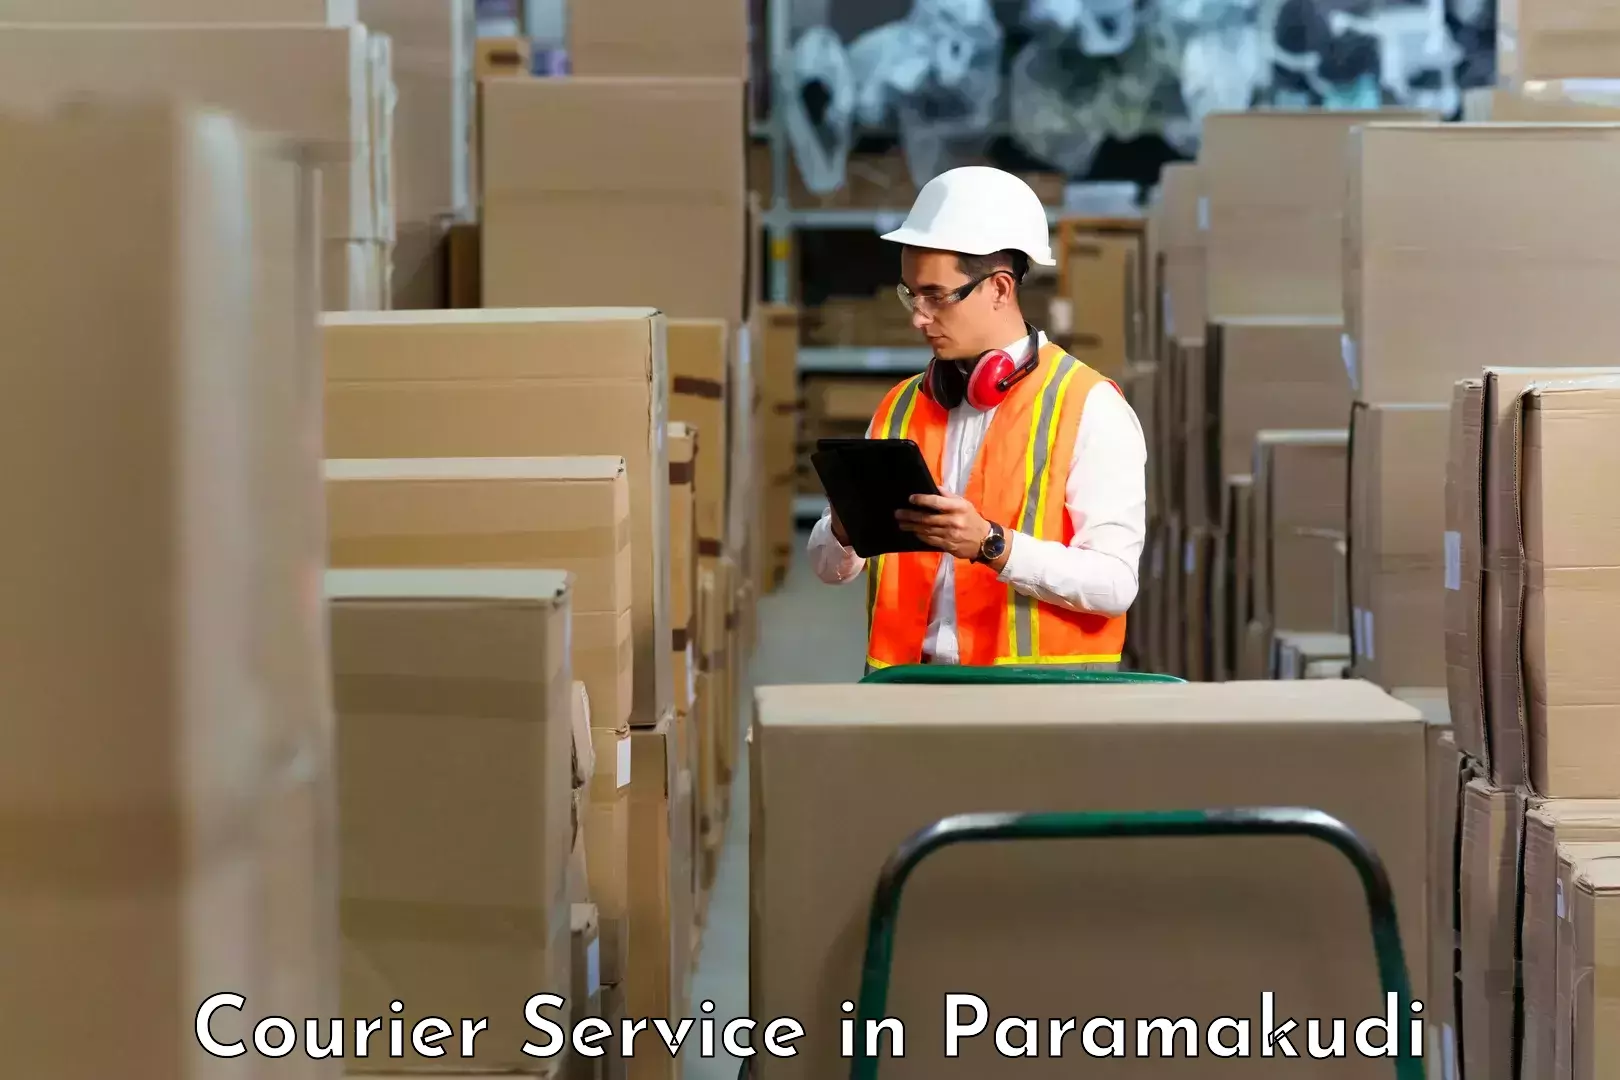 24/7 courier service in Paramakudi